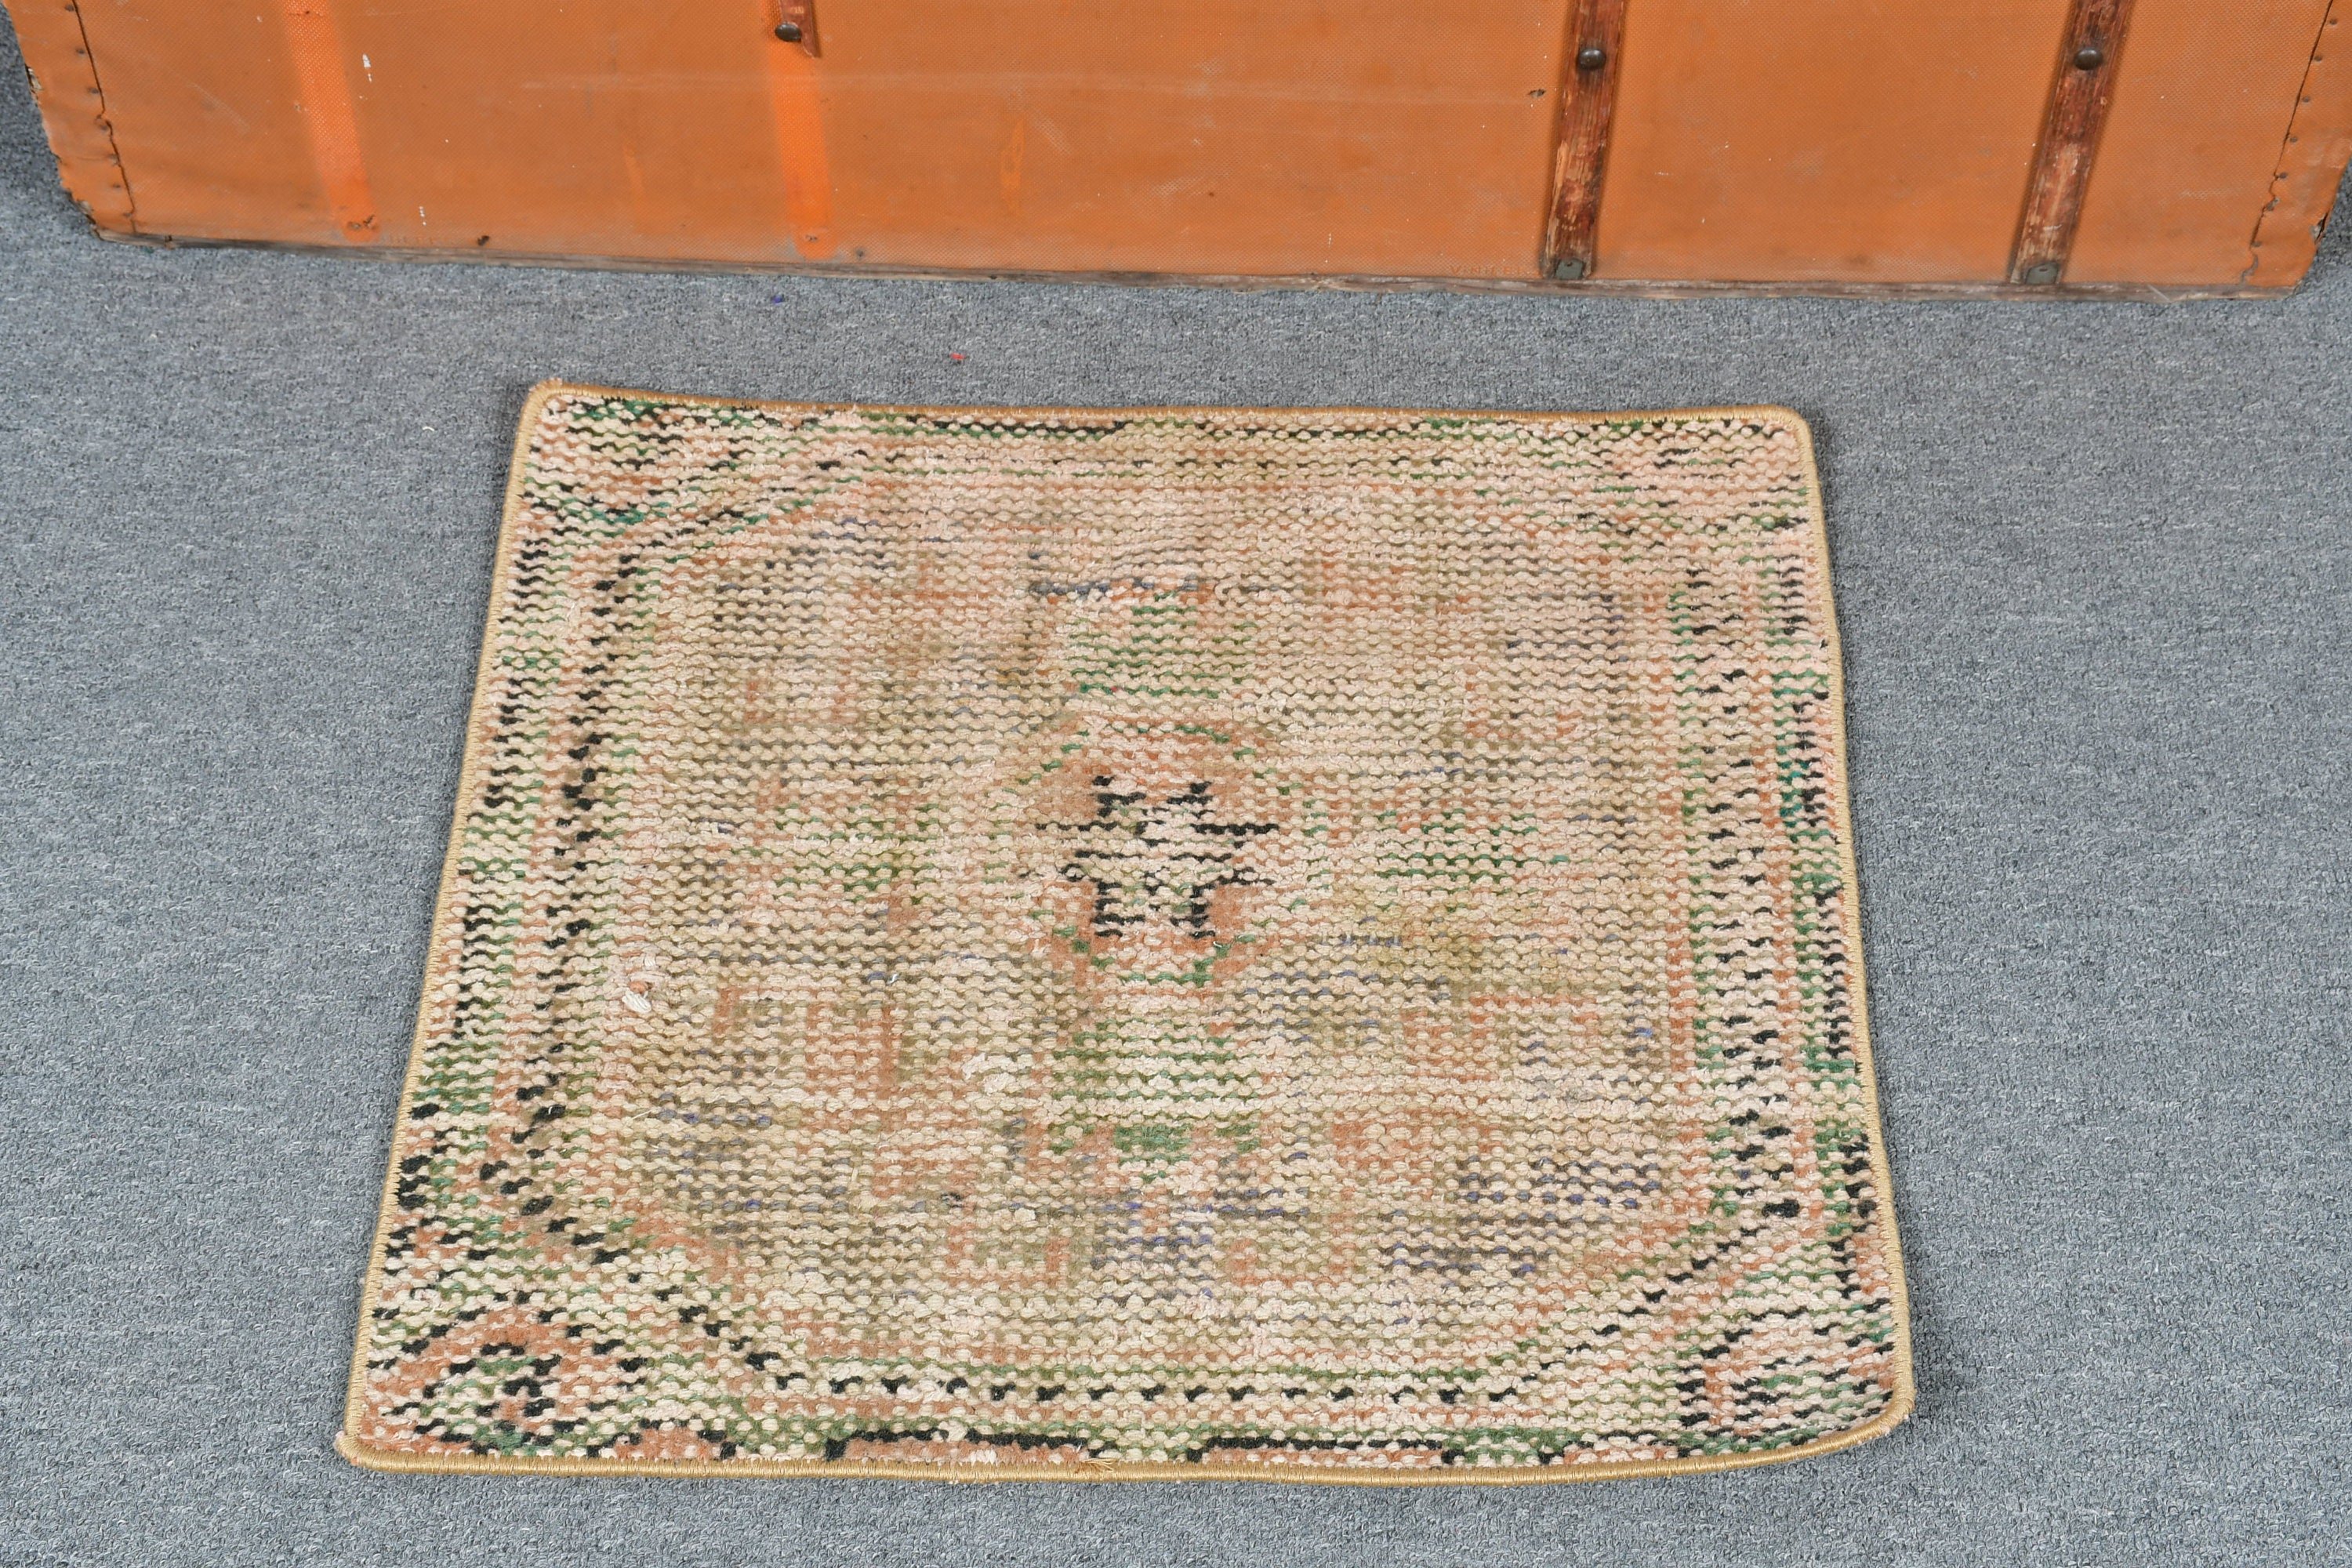 Entry Rug, Brown Oriental Rug, Floor Rugs, Kitchen Rug, Vintage Rugs, 1.8x1.8 ft Small Rug, Rugs for Kitchen, Turkish Rug